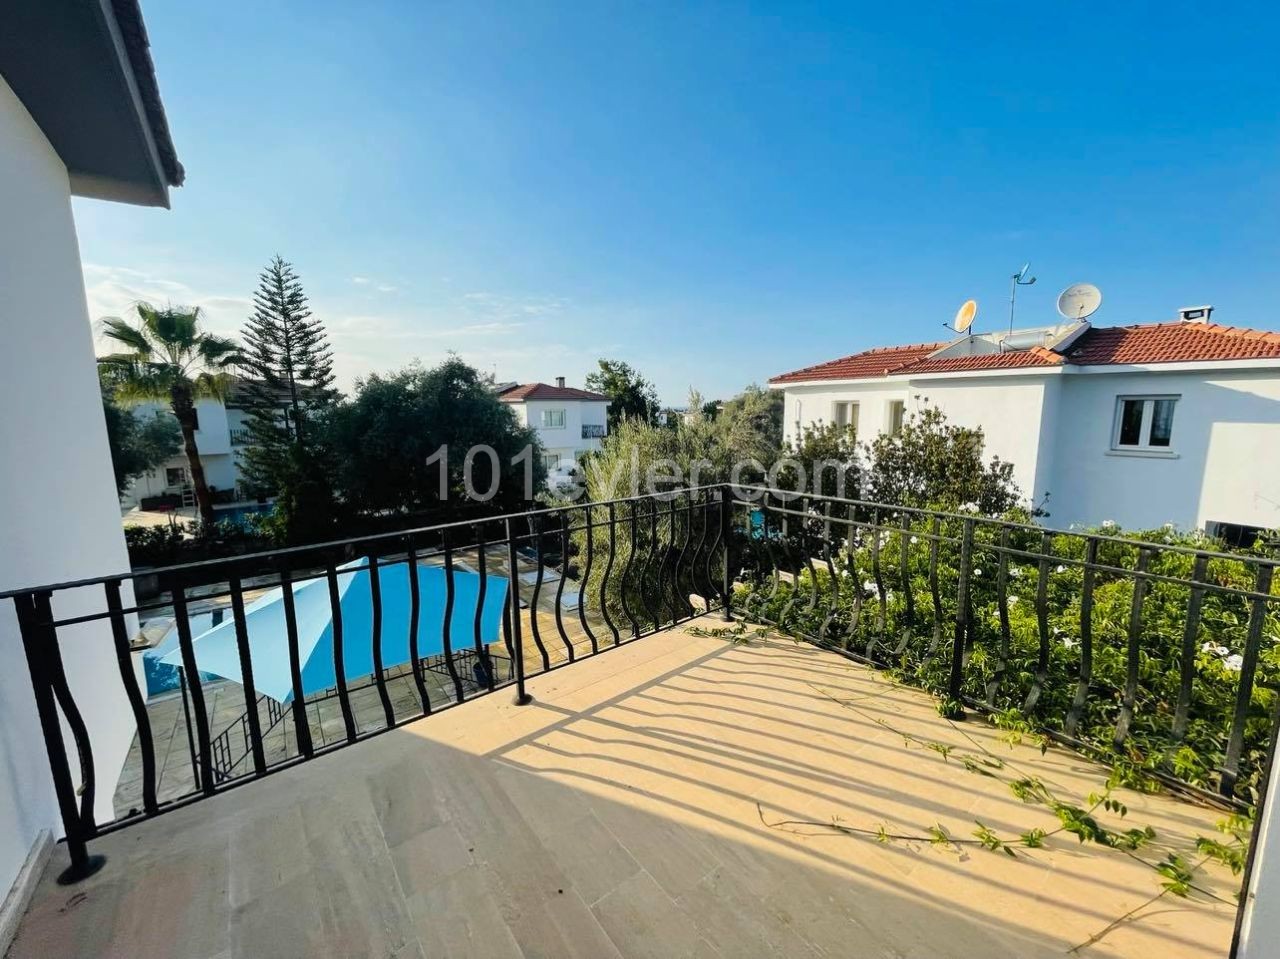 3+1 VILLA WITH PRIVATE POOL AND LARGE GARDEN IN OZANKOY, CYPRUS GIRNE ** 